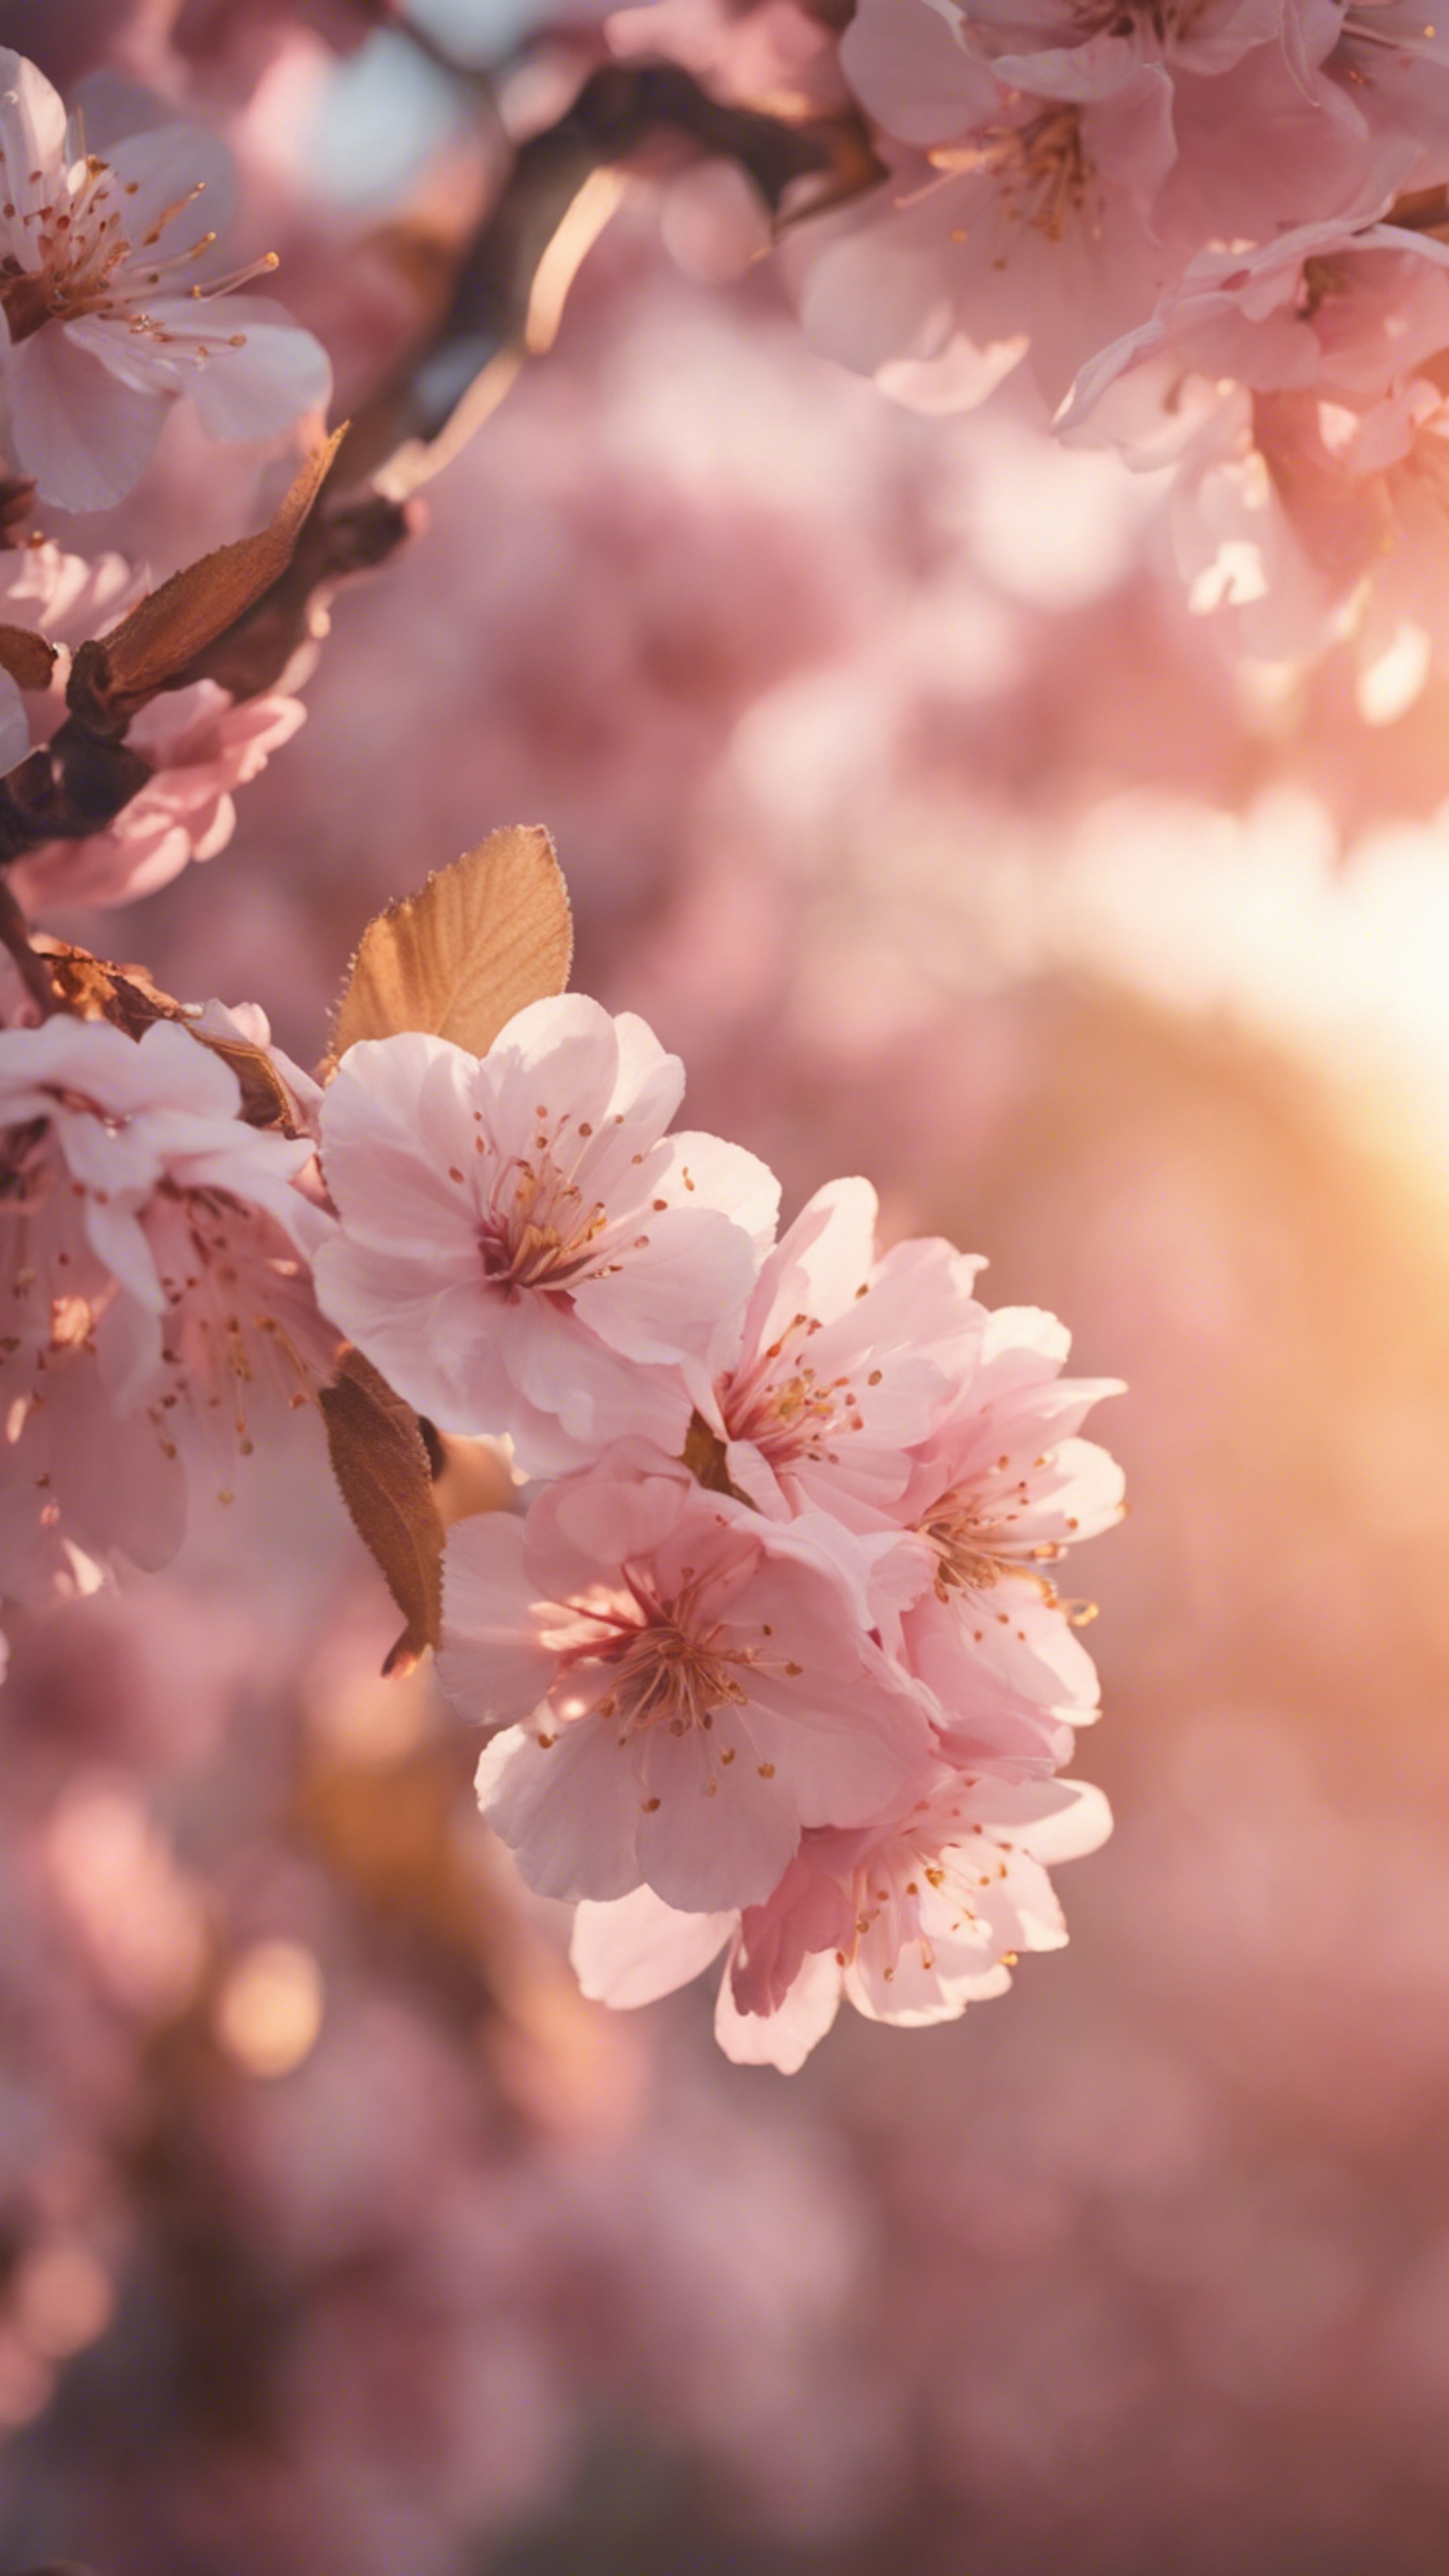 A delicate pink cherry blossom tree with gold leaves against a soft sunset. Шпалери[63878b5c392143fbba4e]